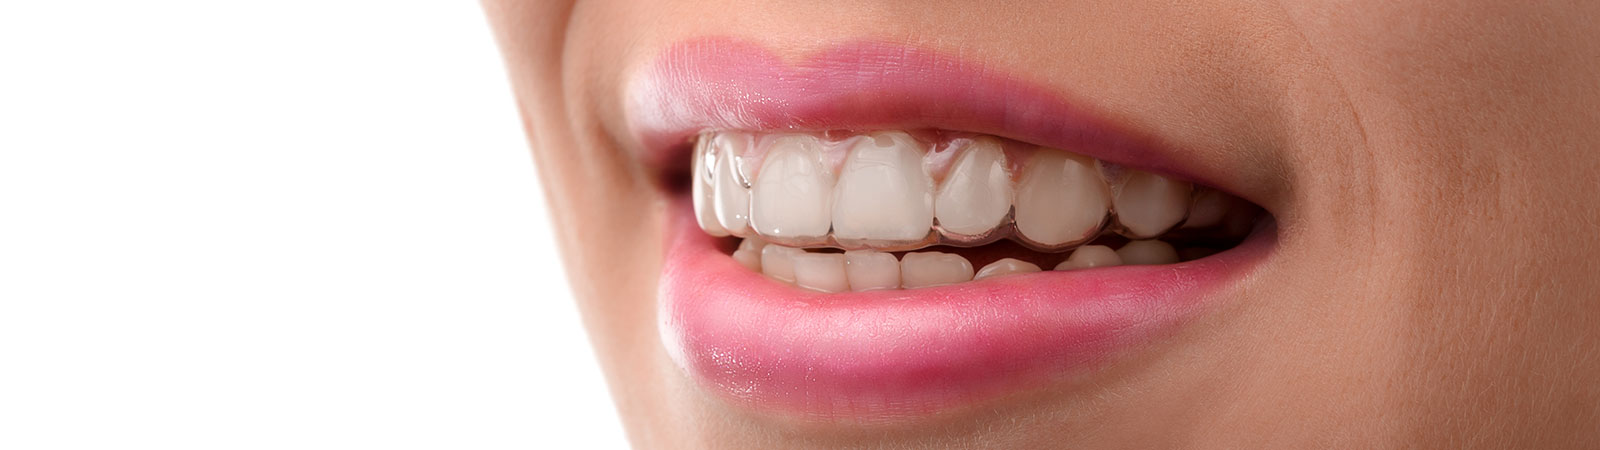 Invisalign Clear Braces for Straight Teeth in Kennesaw - Invisalign  Treatment near Acworth - Clear Aligners